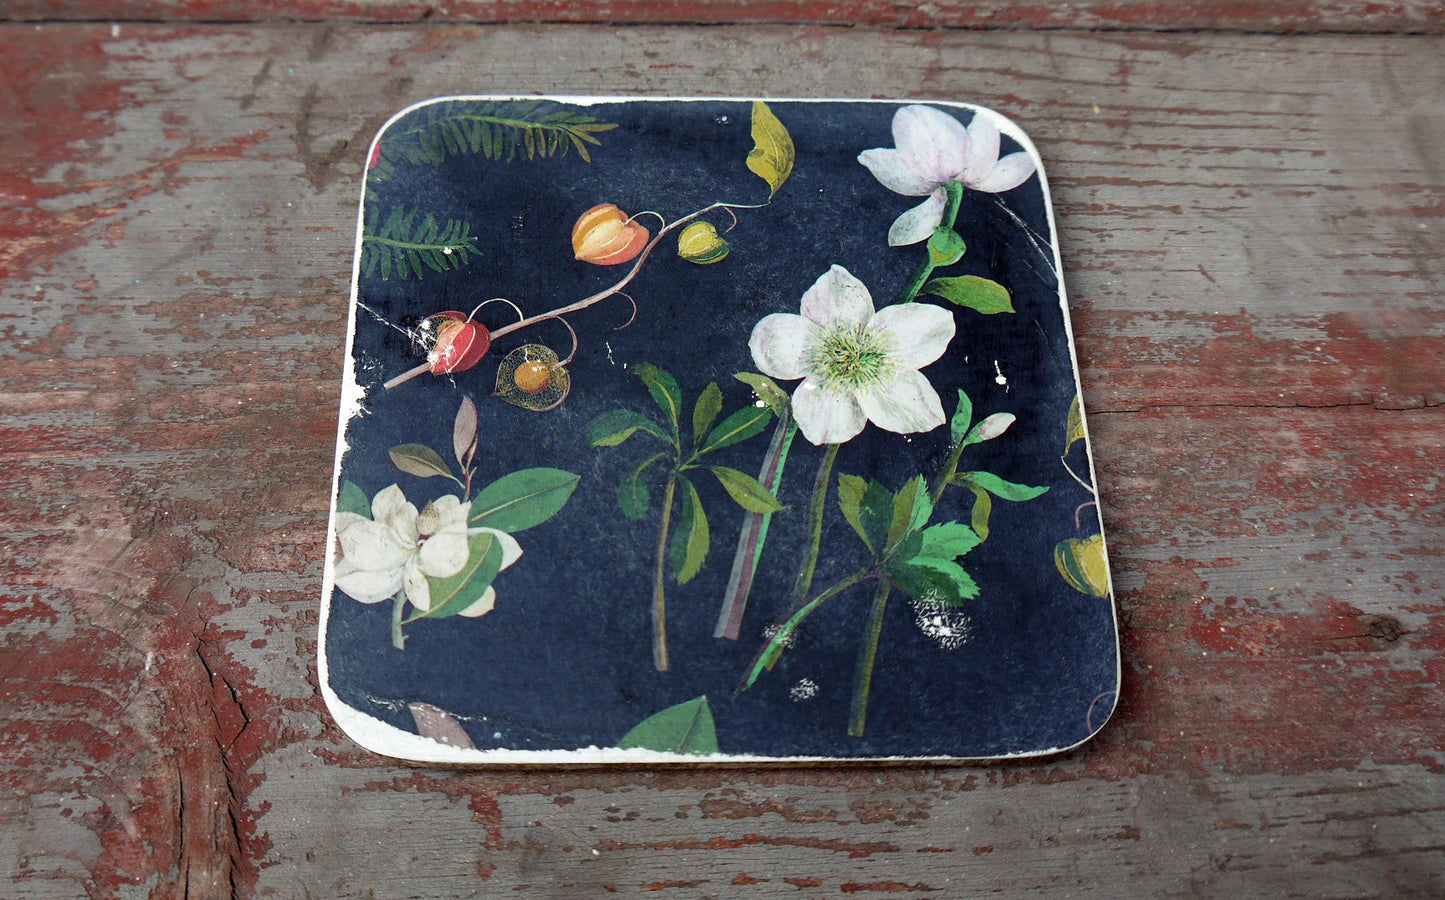 Set of six vintage paper coasters in dark grey and floral design on white.